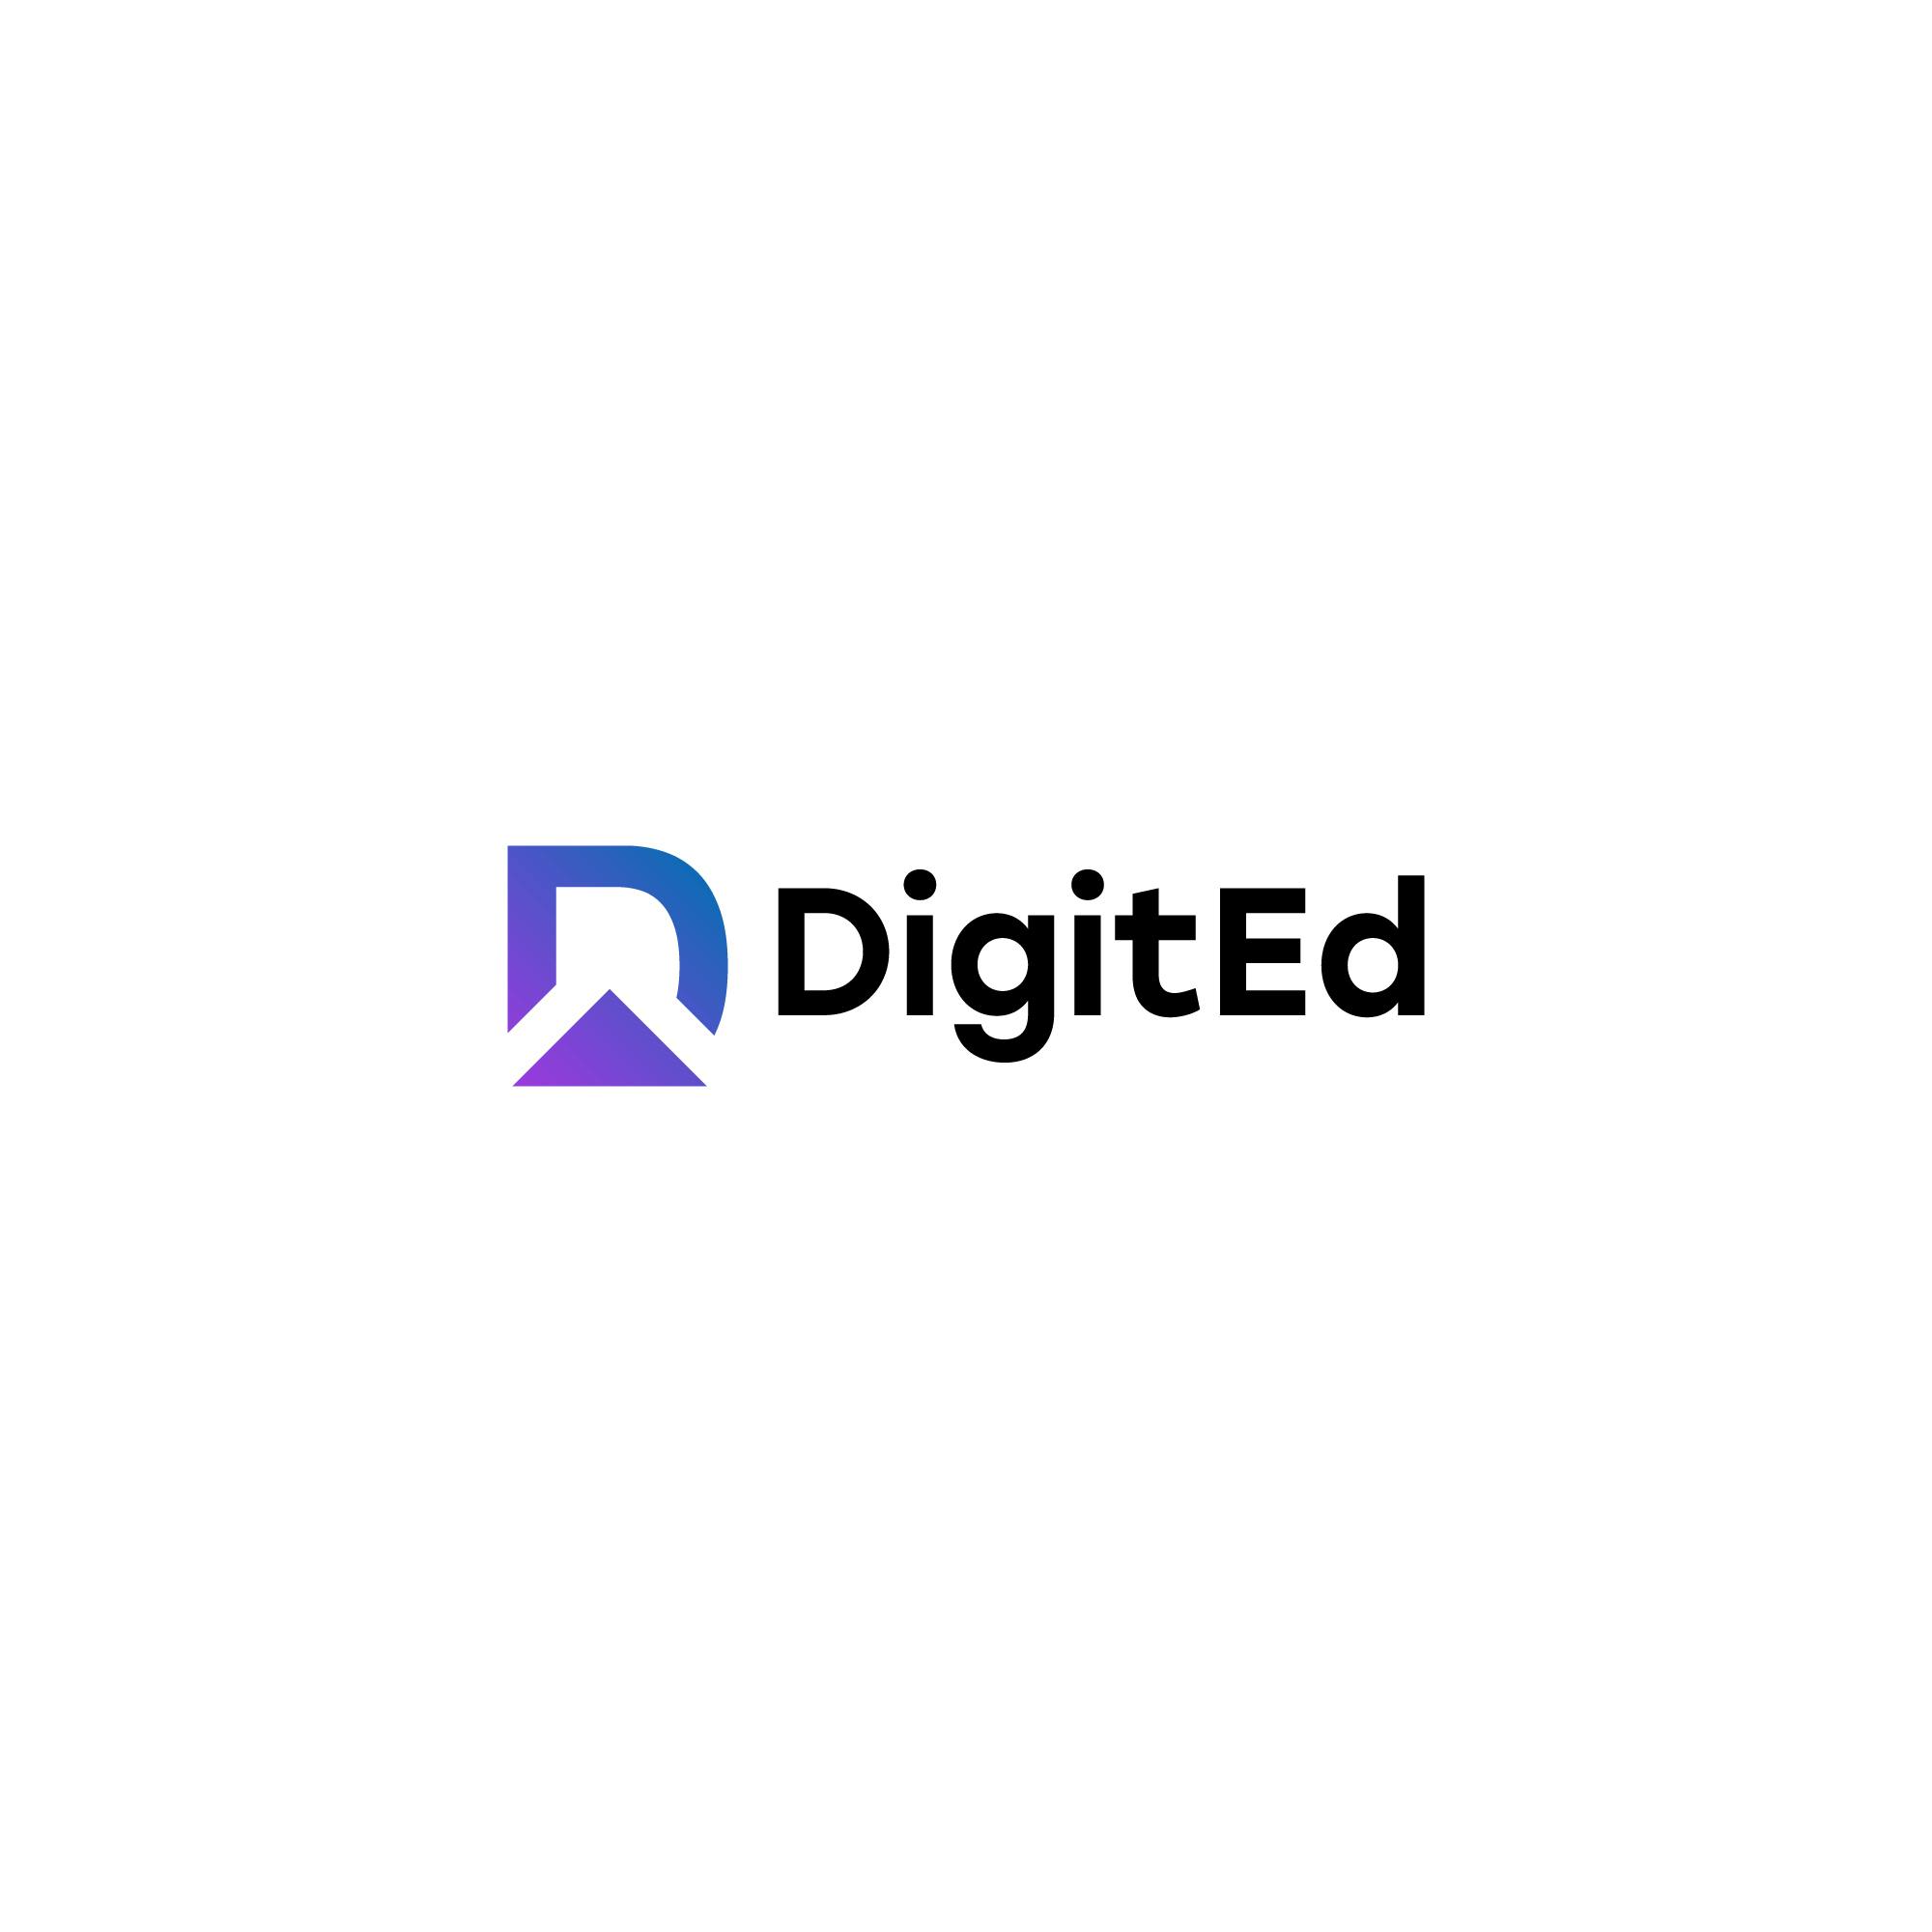 How to use DigitEd for your benefit?